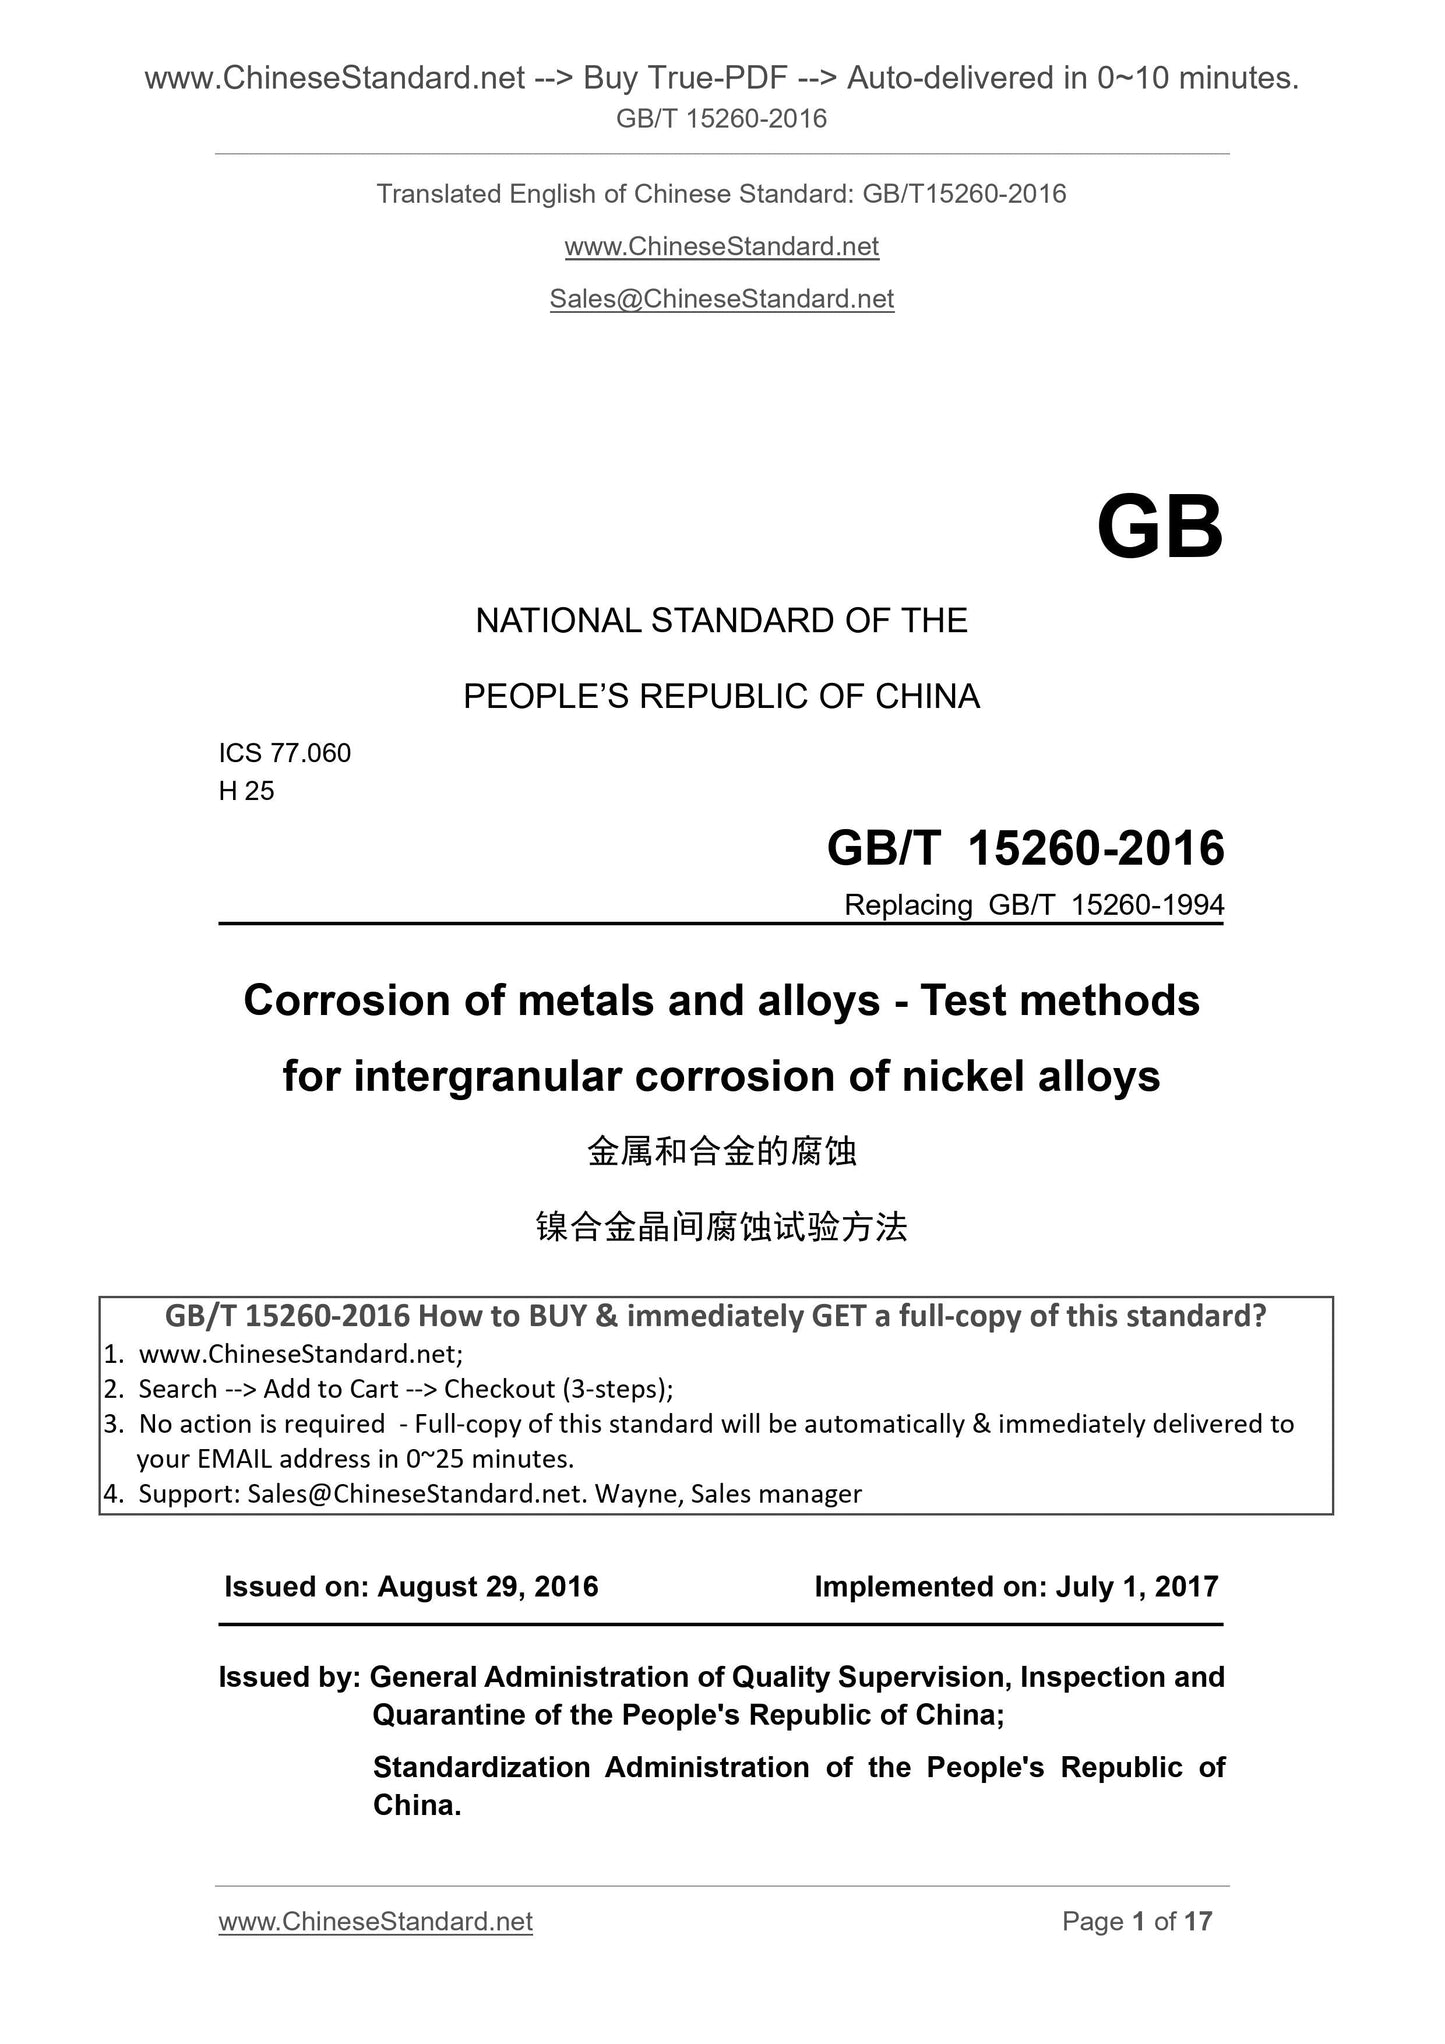 GB/T 15260-2016 Page 1